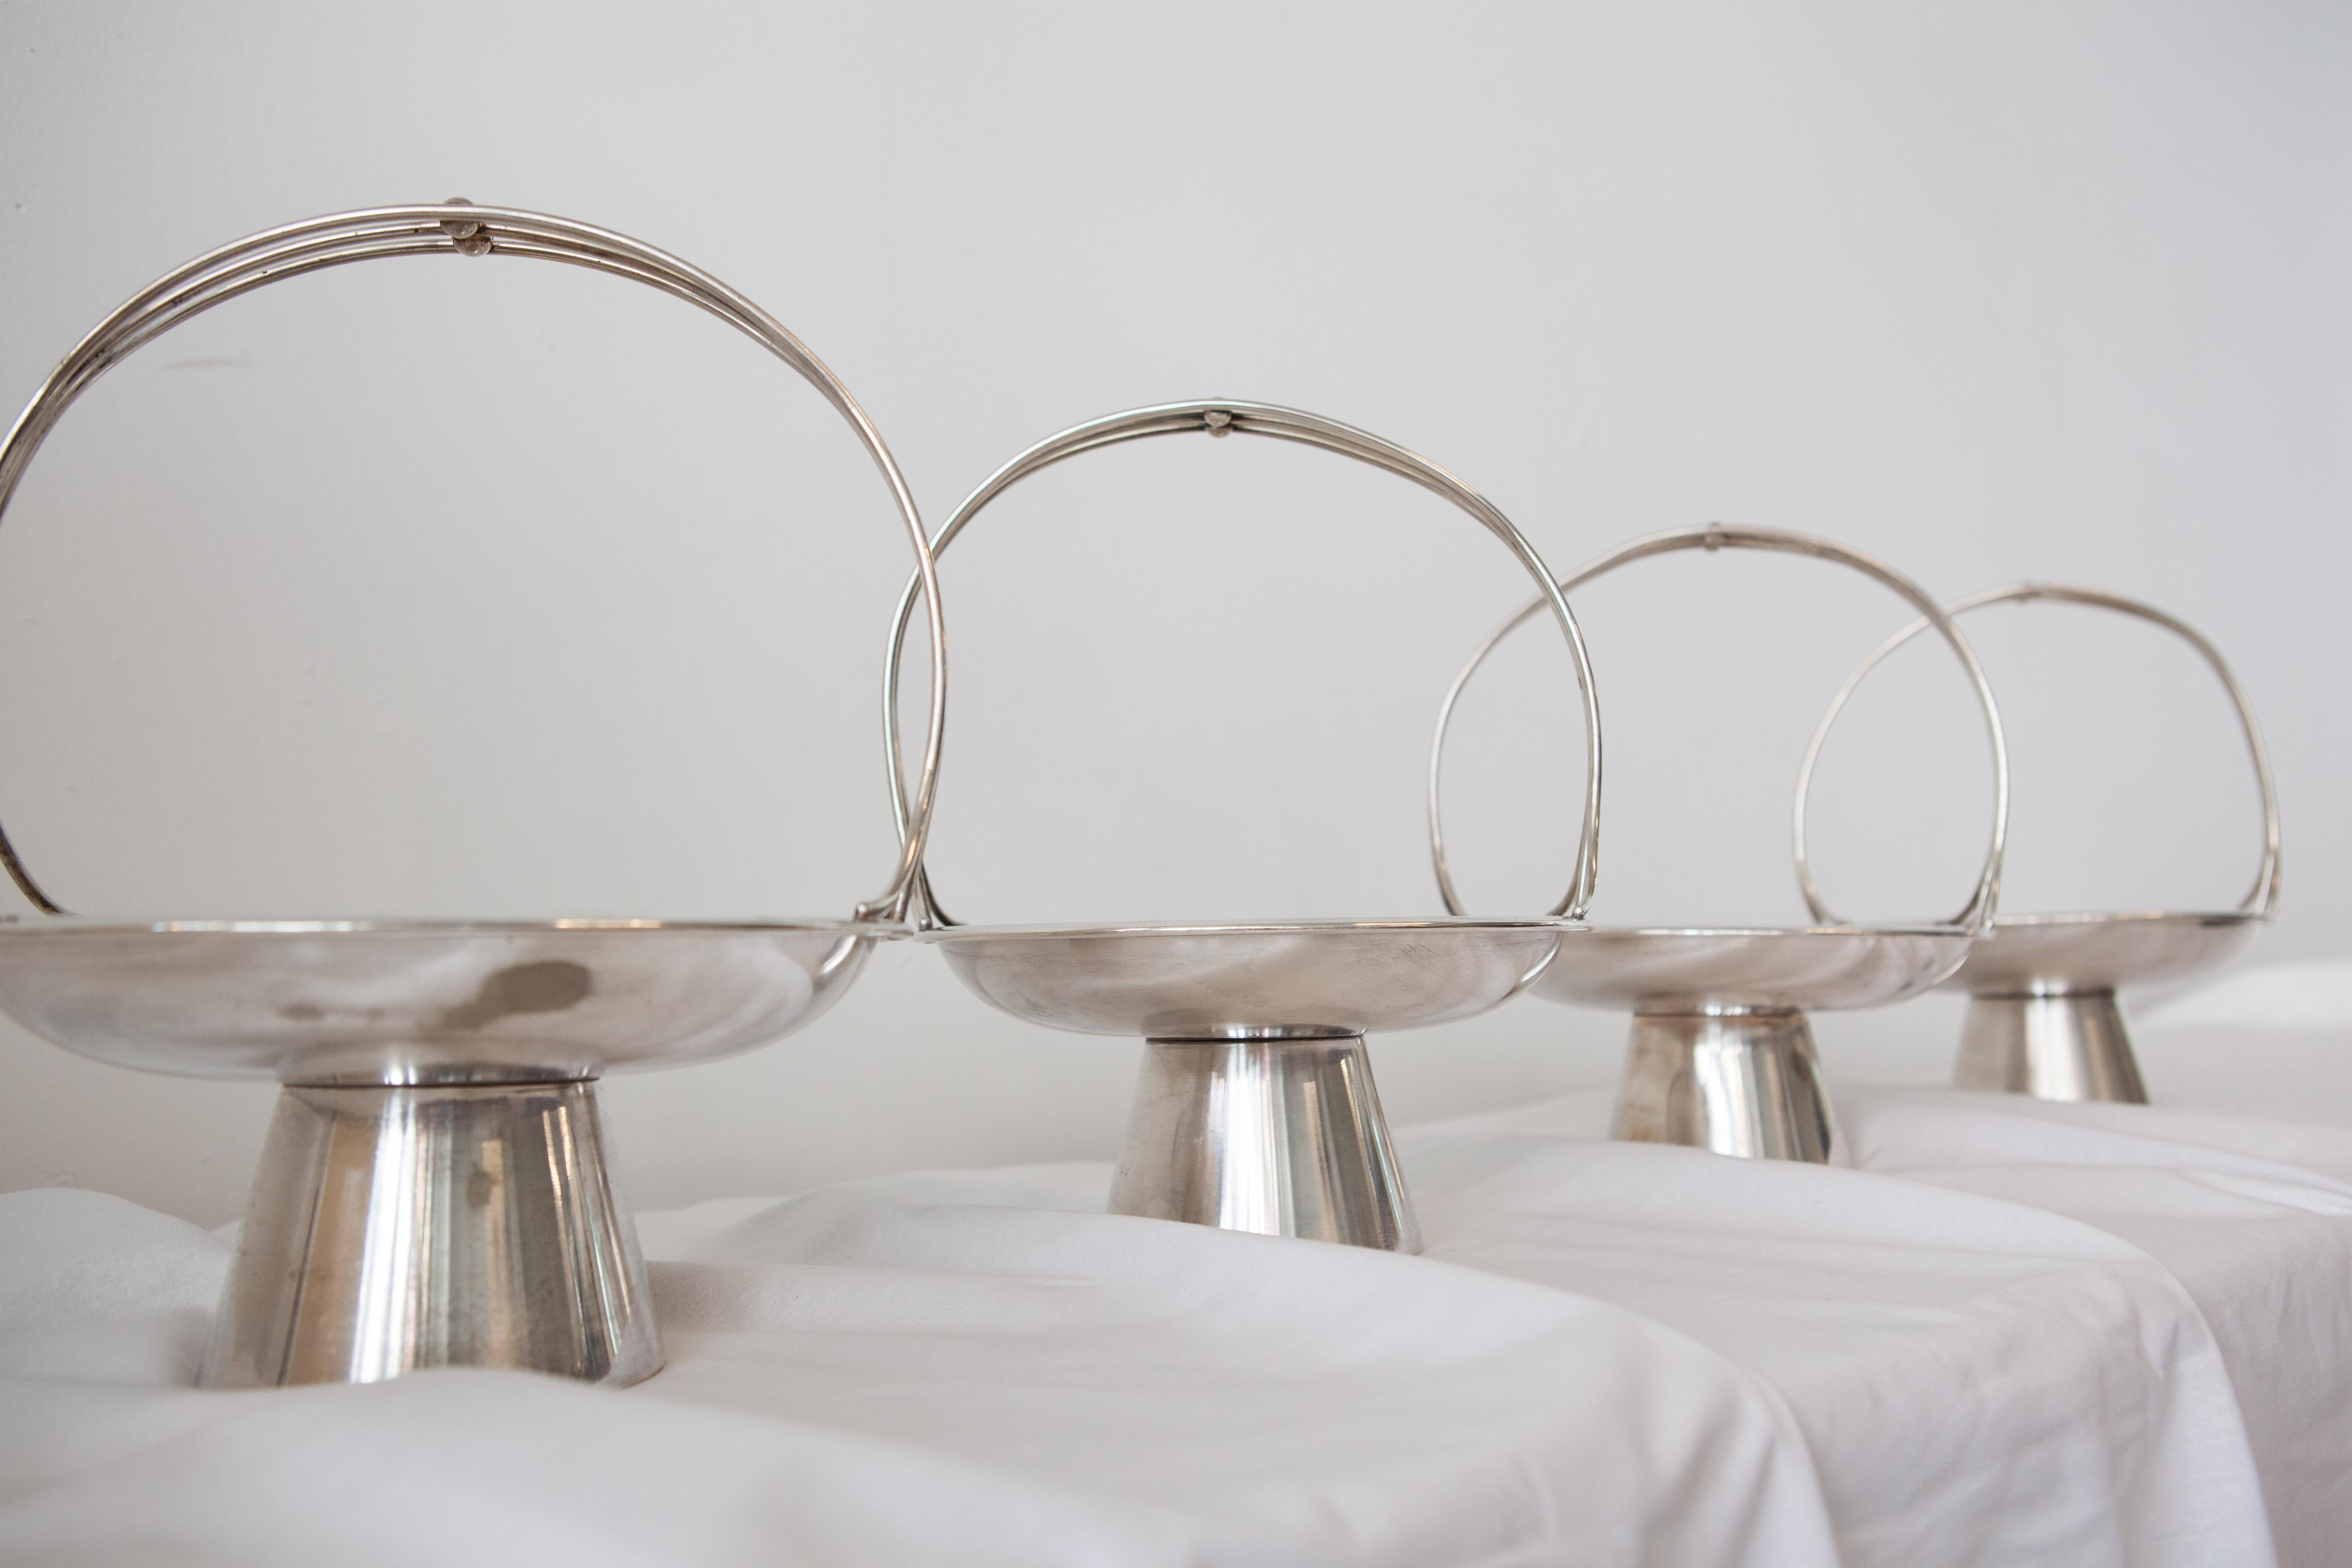 Set of 4 alpacca fruit baskets by Gio Ponti for Arthur Krupp, Italy, 1930s In Good Condition For Sale In Den Haag, ZH